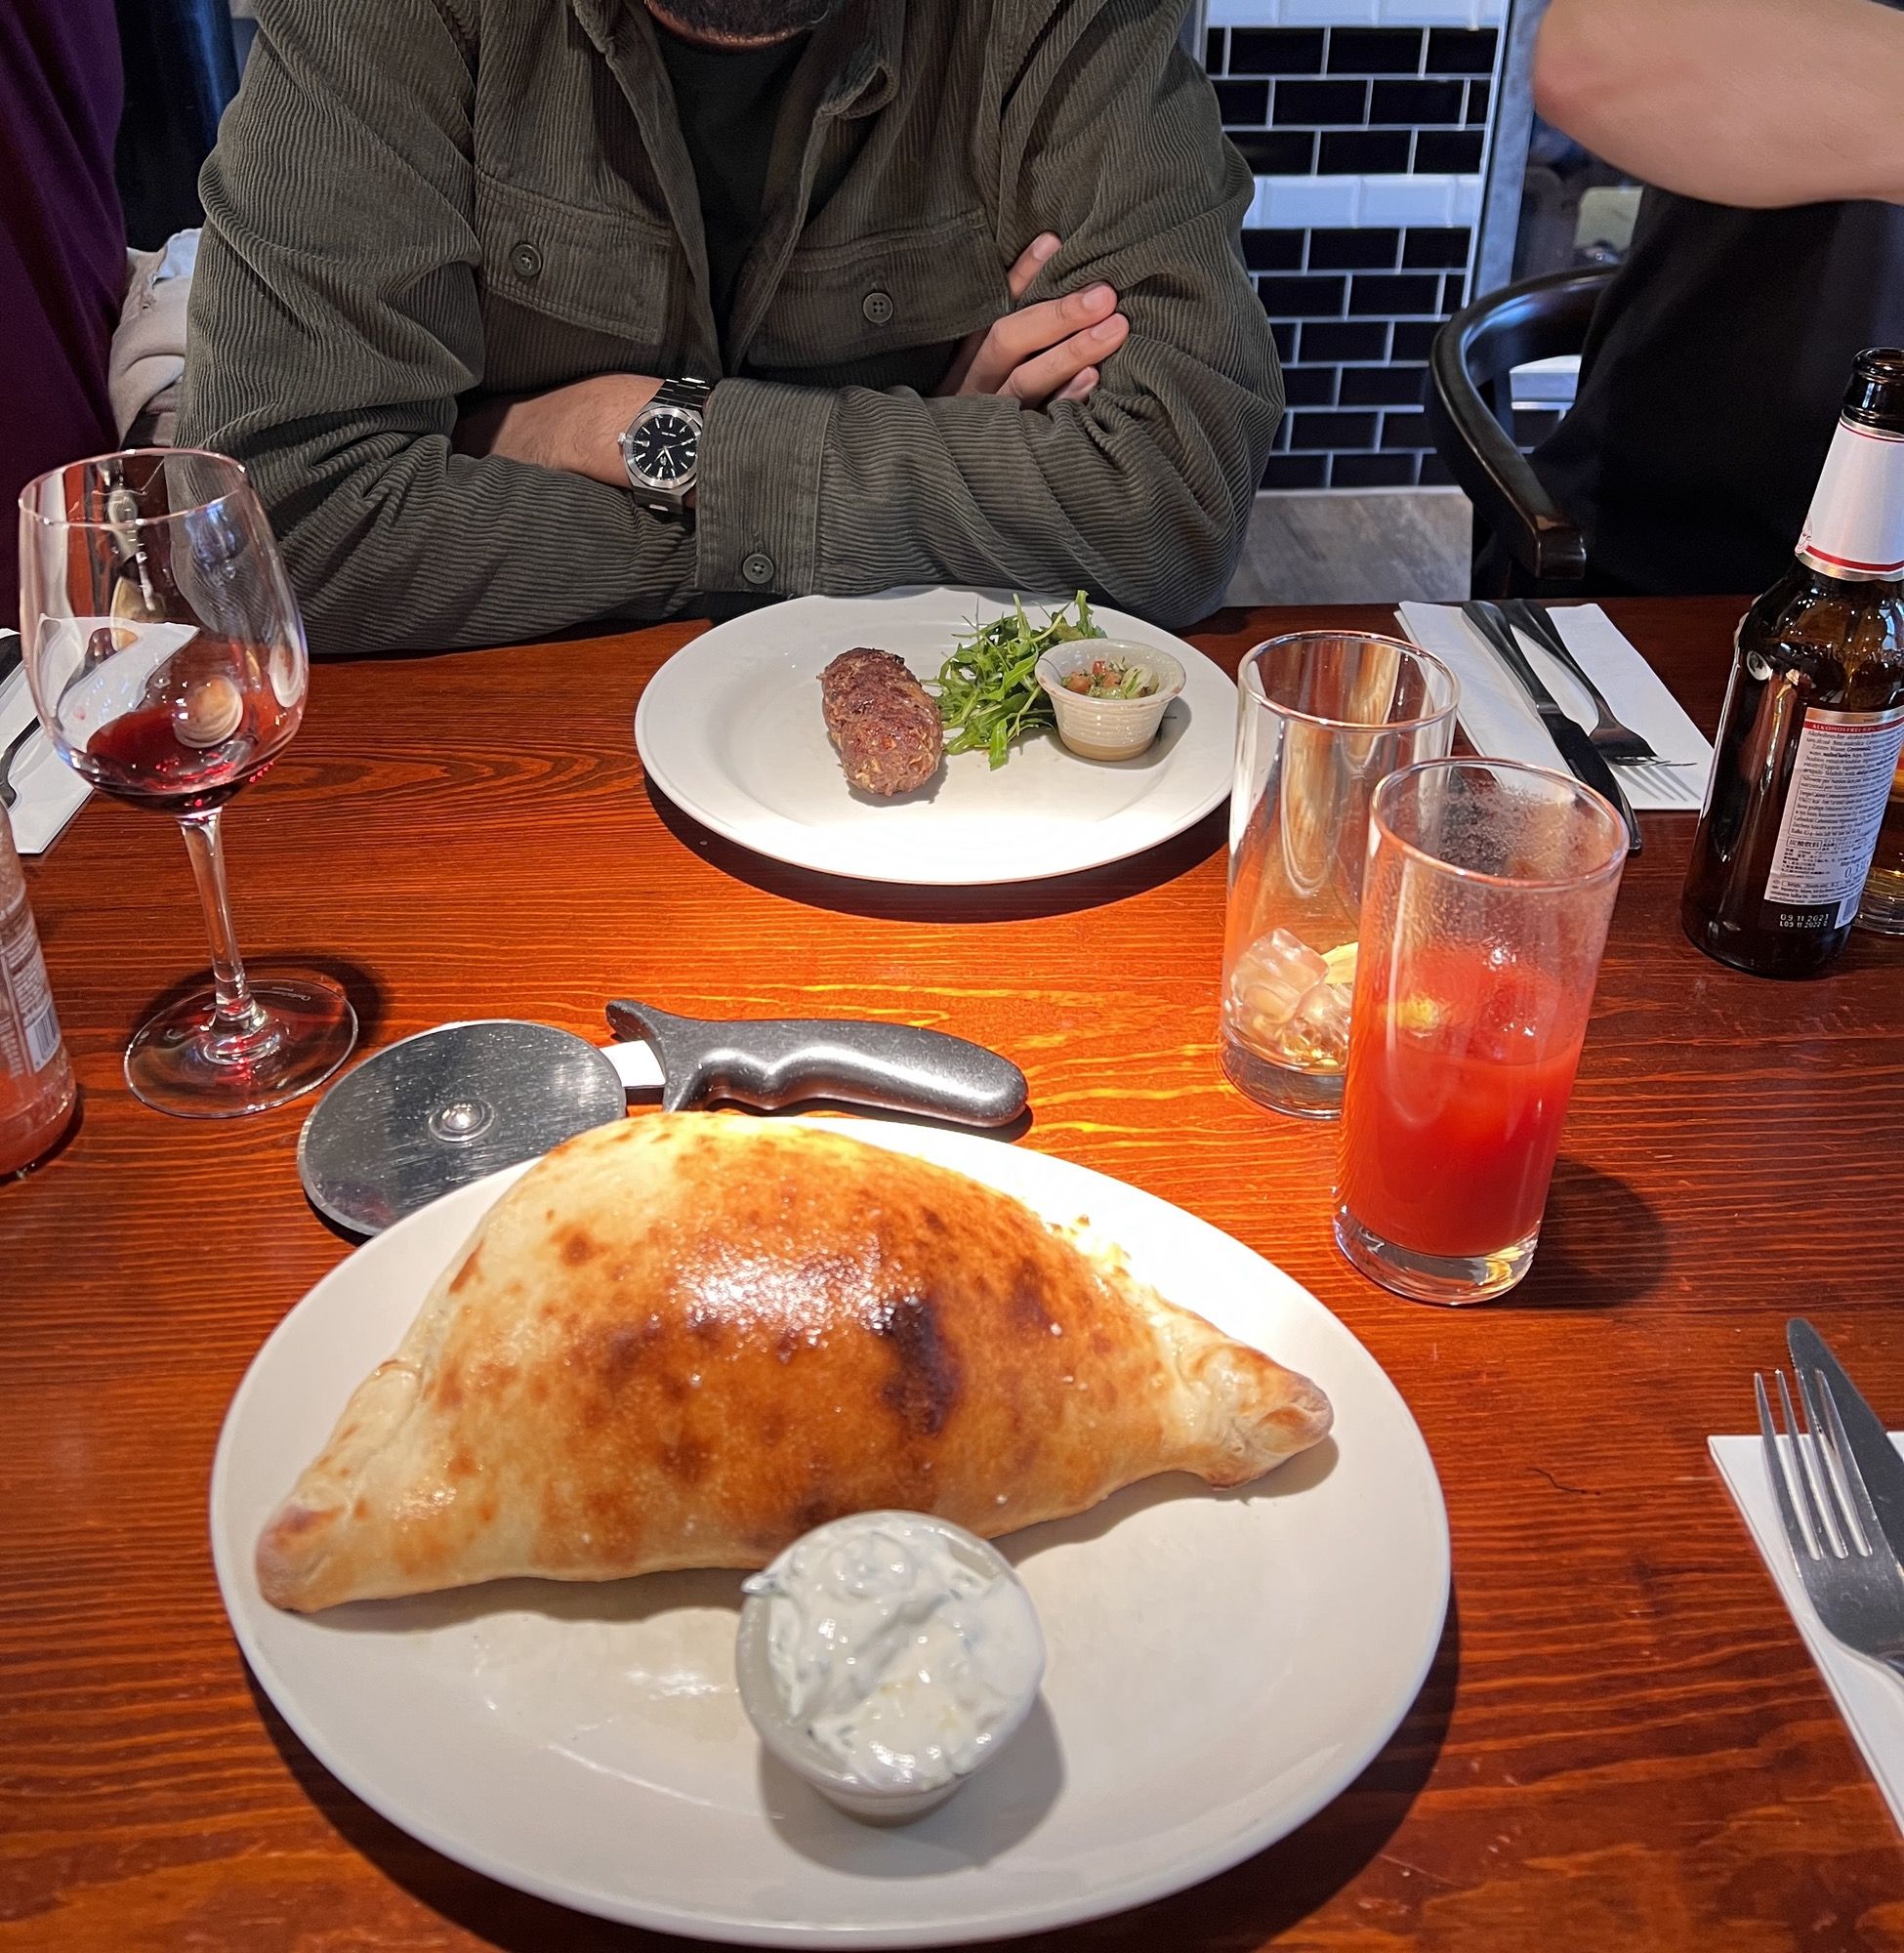 My calzone vs my colleague’s kofte kebab. He deeply regrets going on a keto diet.